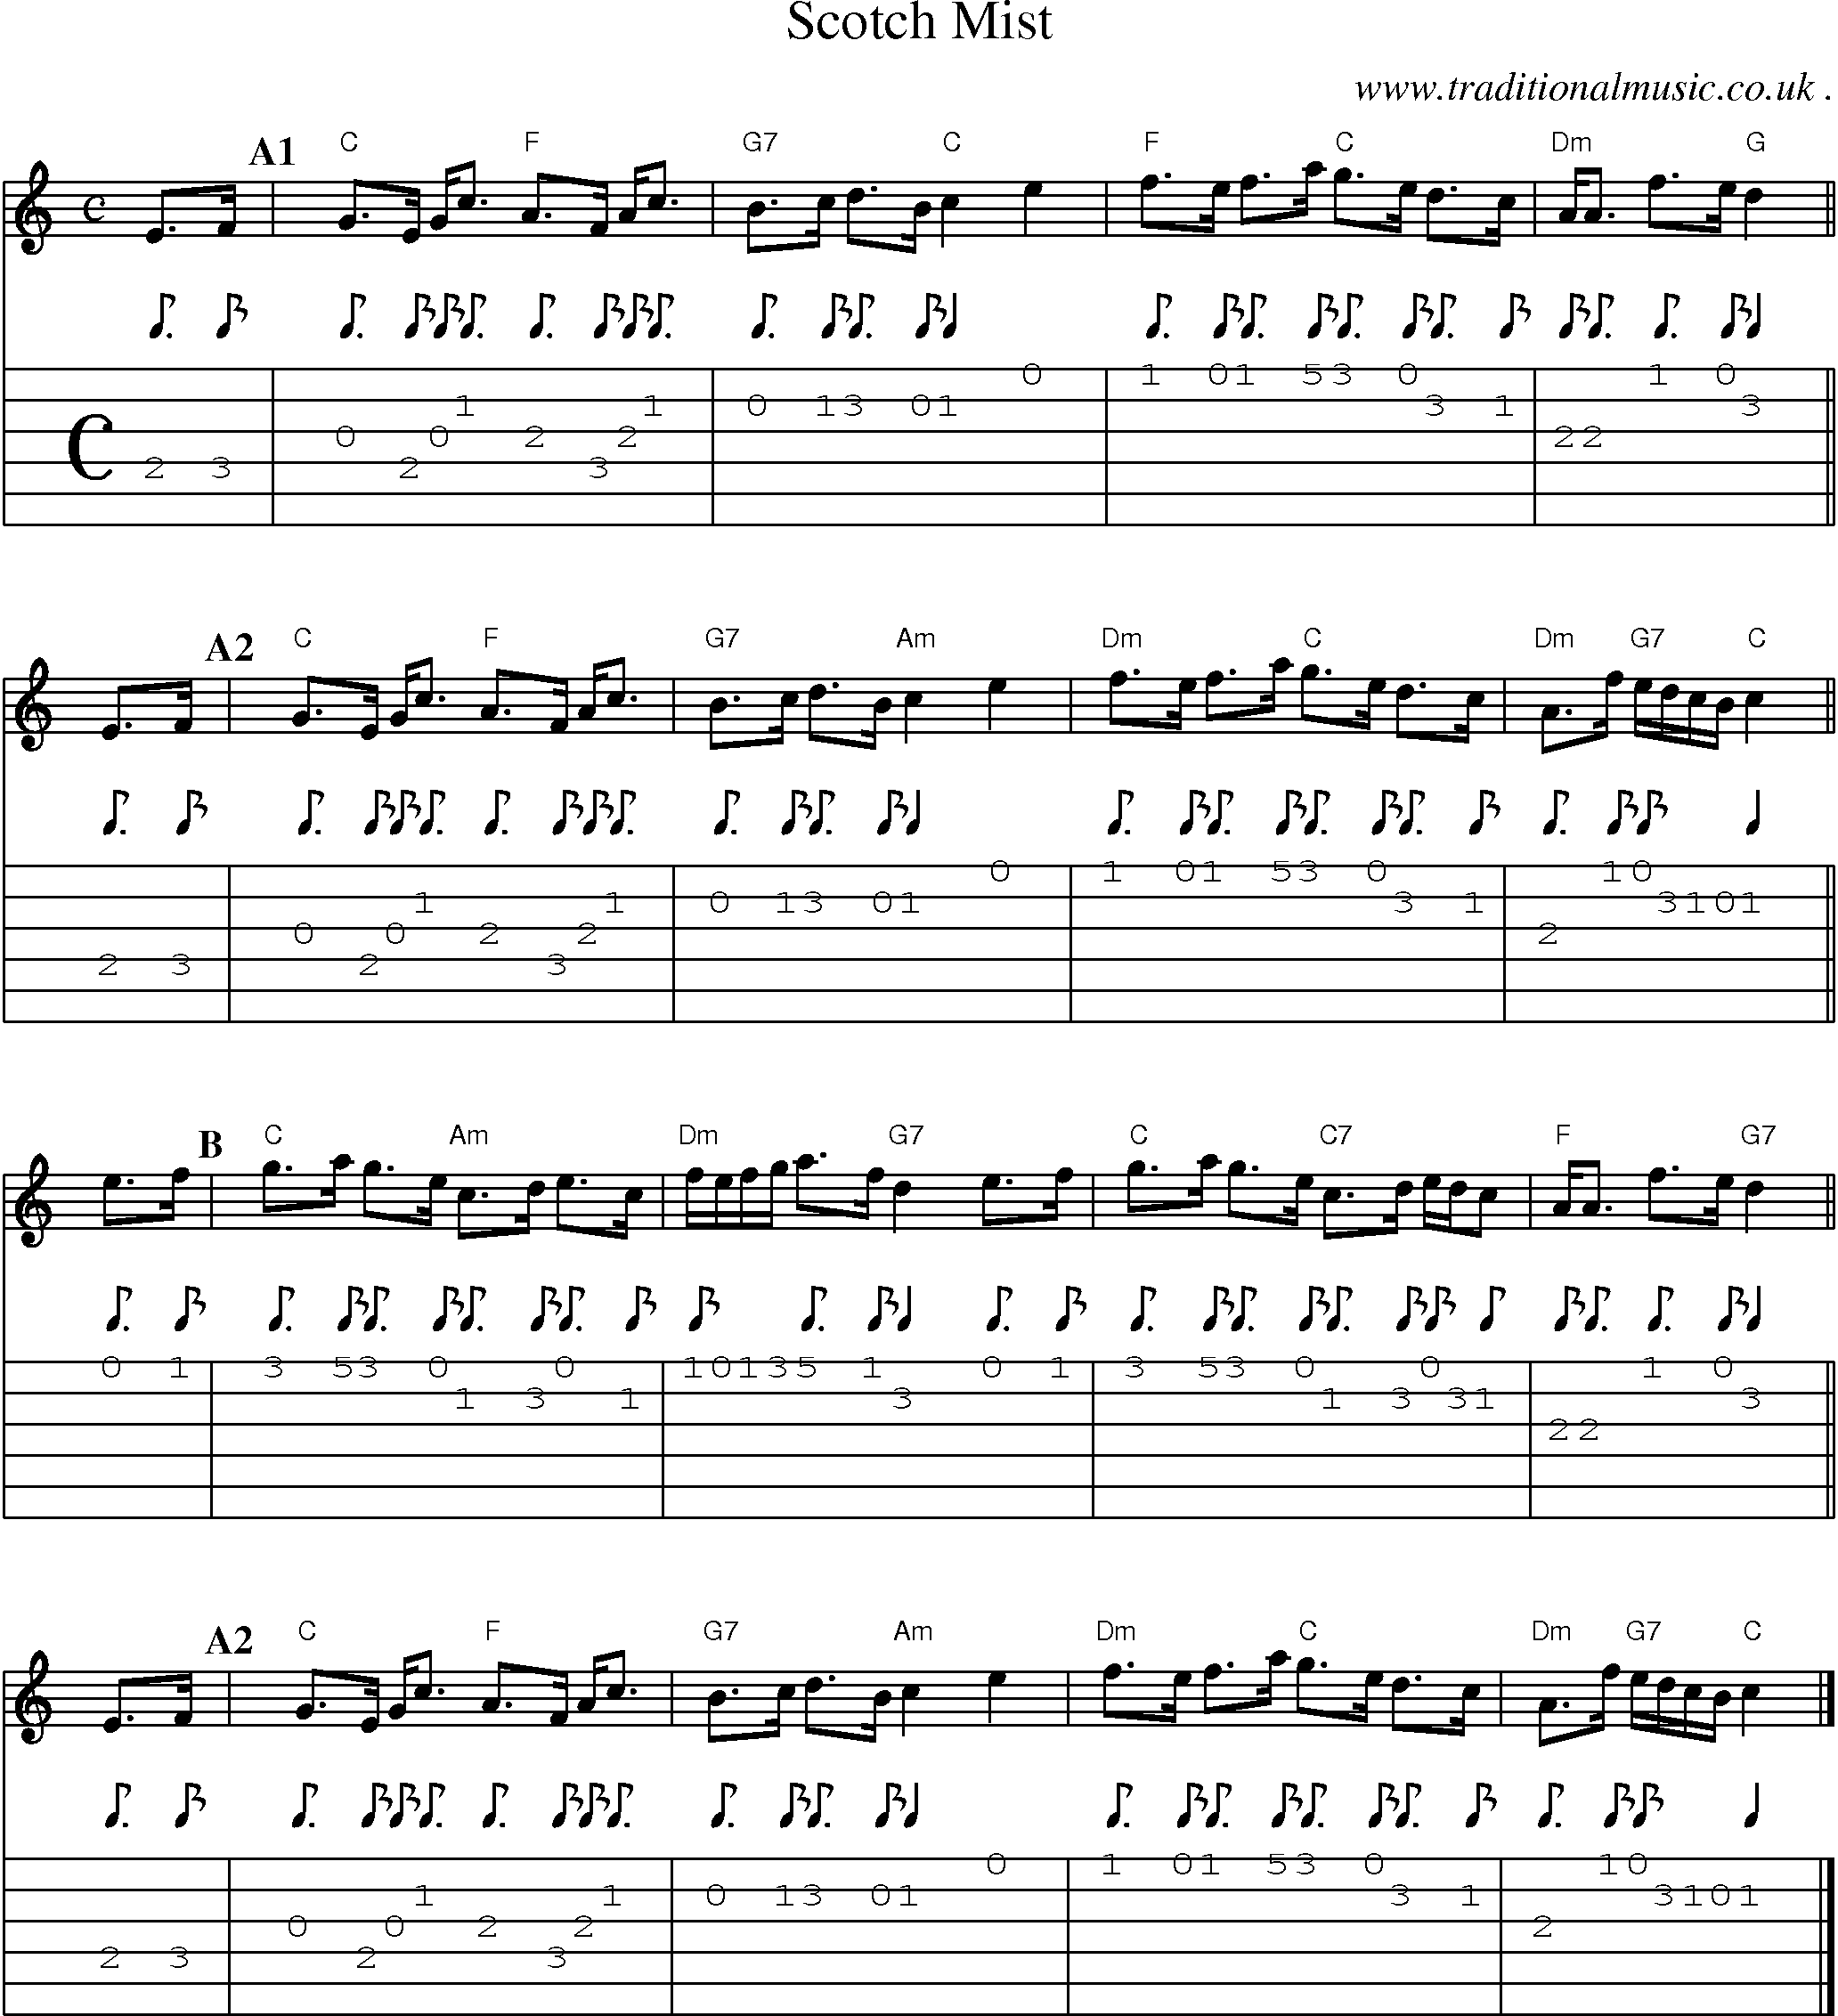 Sheet-music  score, Chords and Guitar Tabs for Scotch Mist